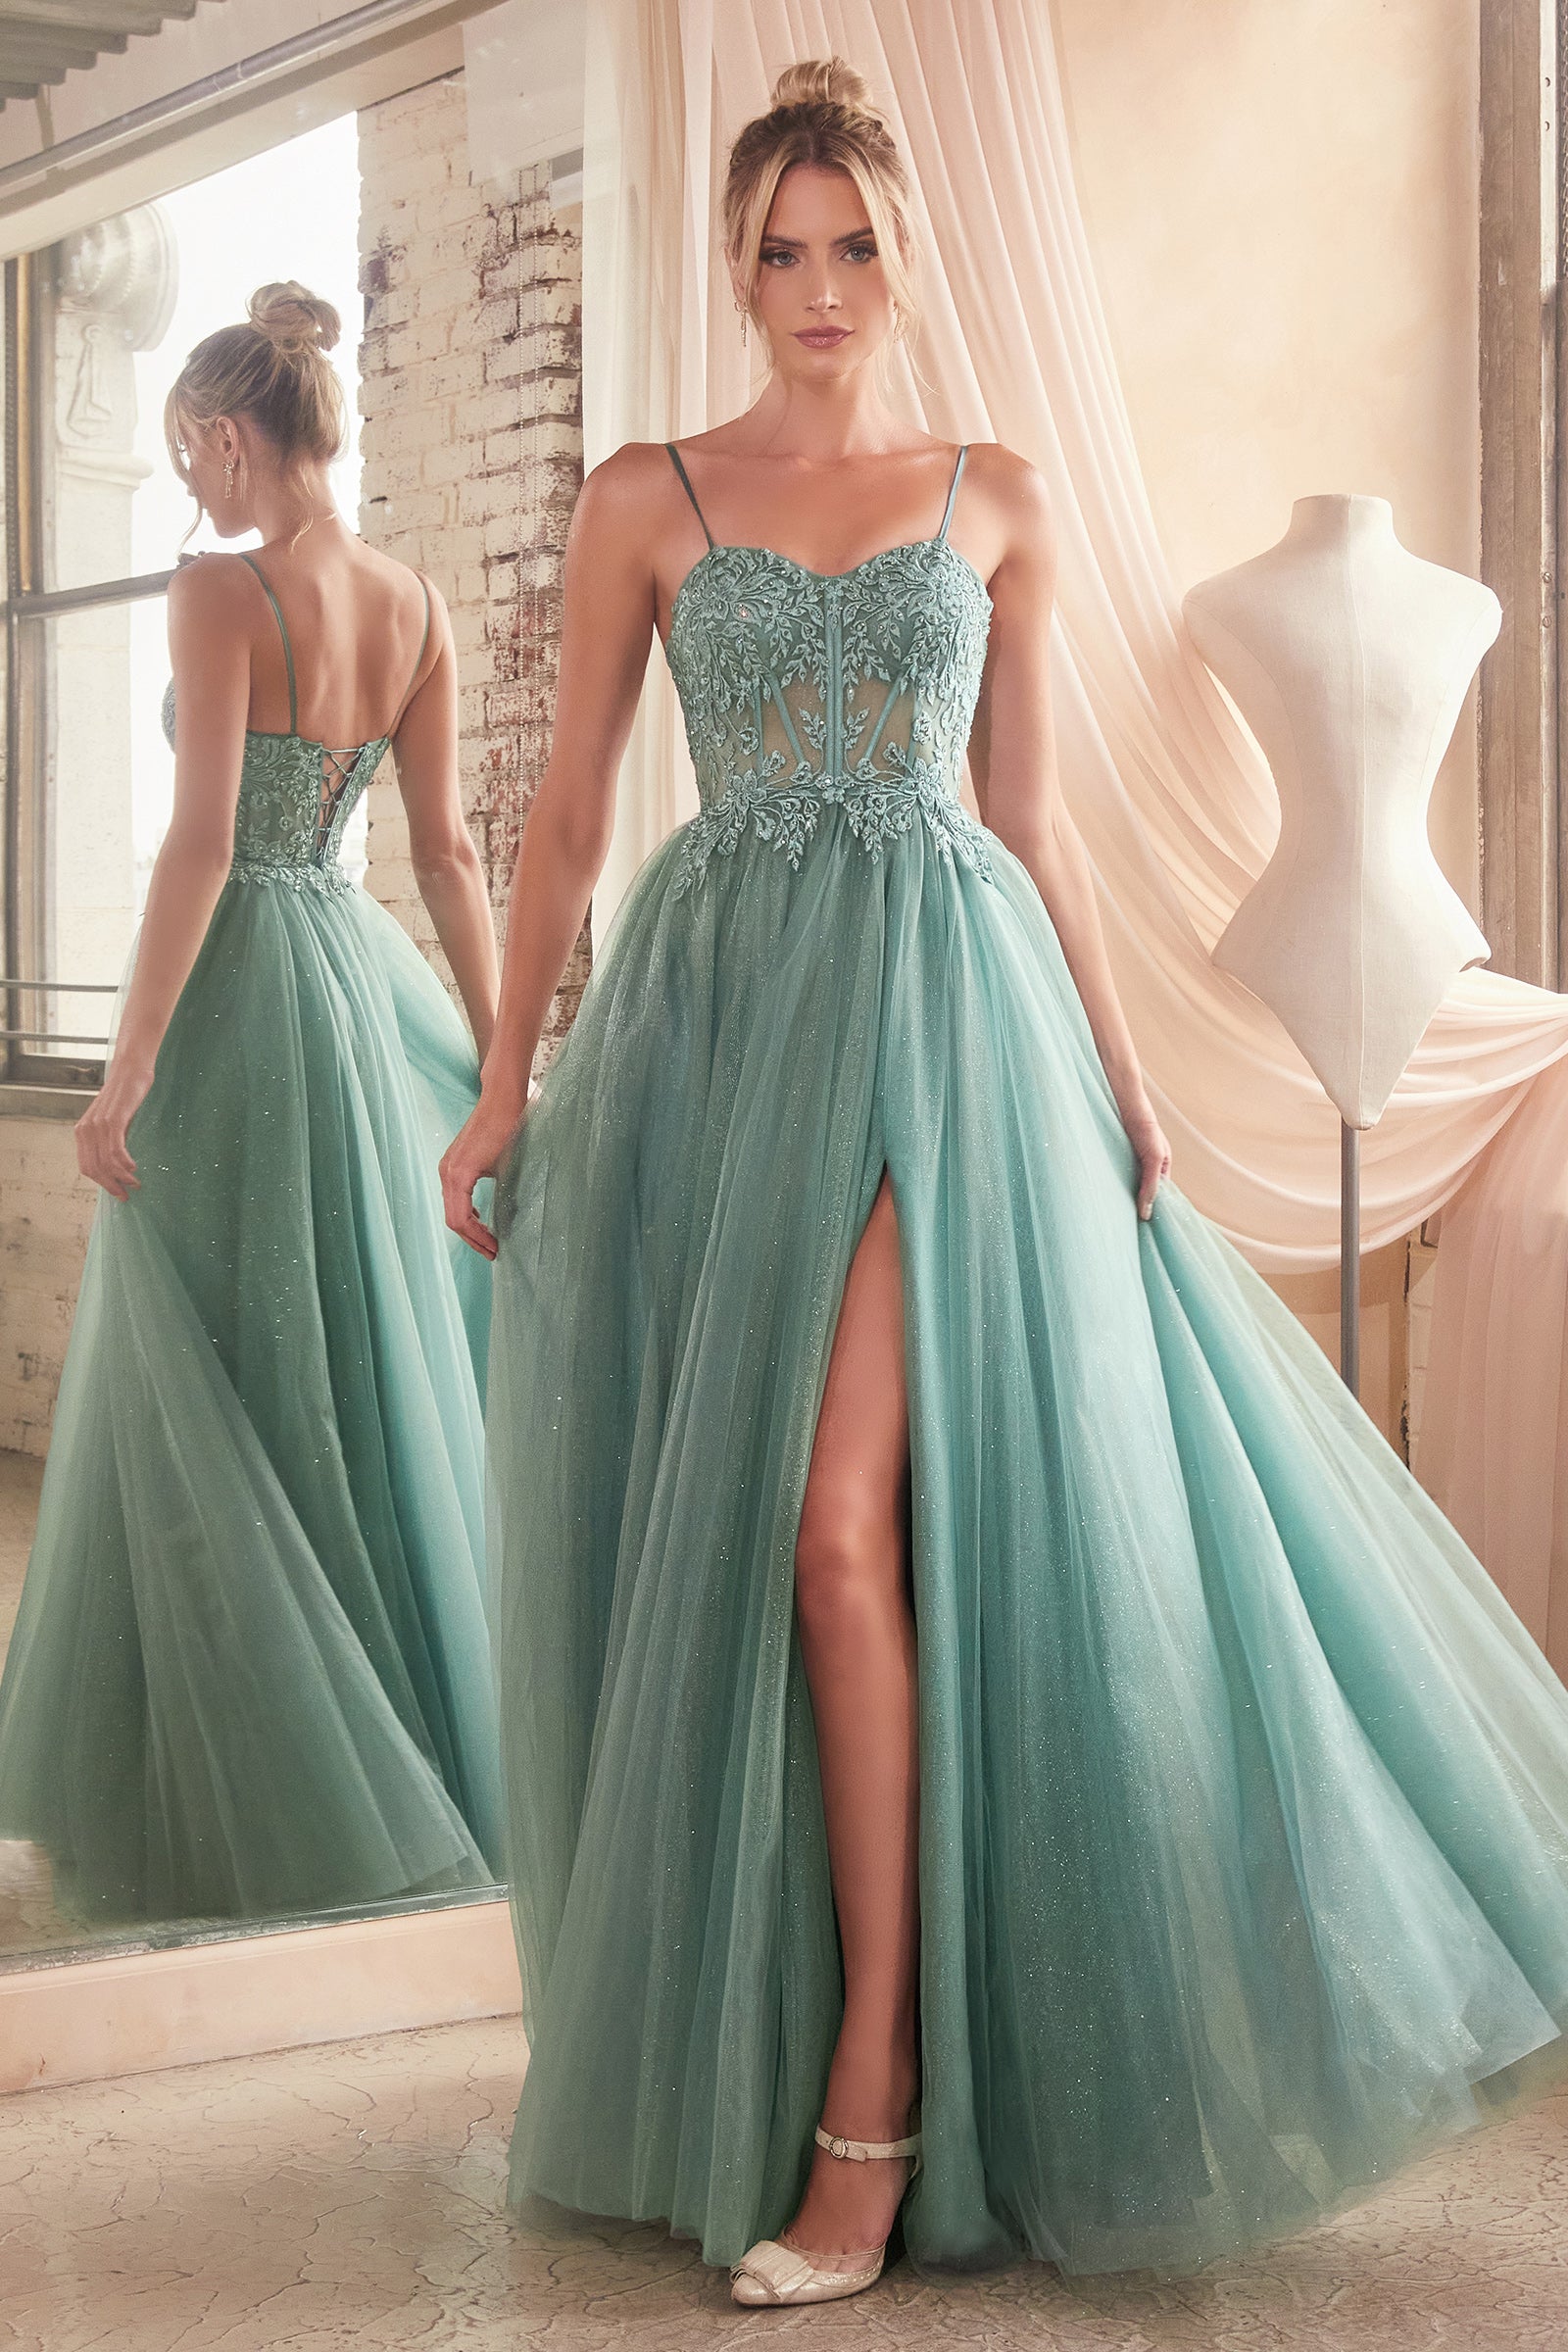 Discover 141+ tulle prom dress latest